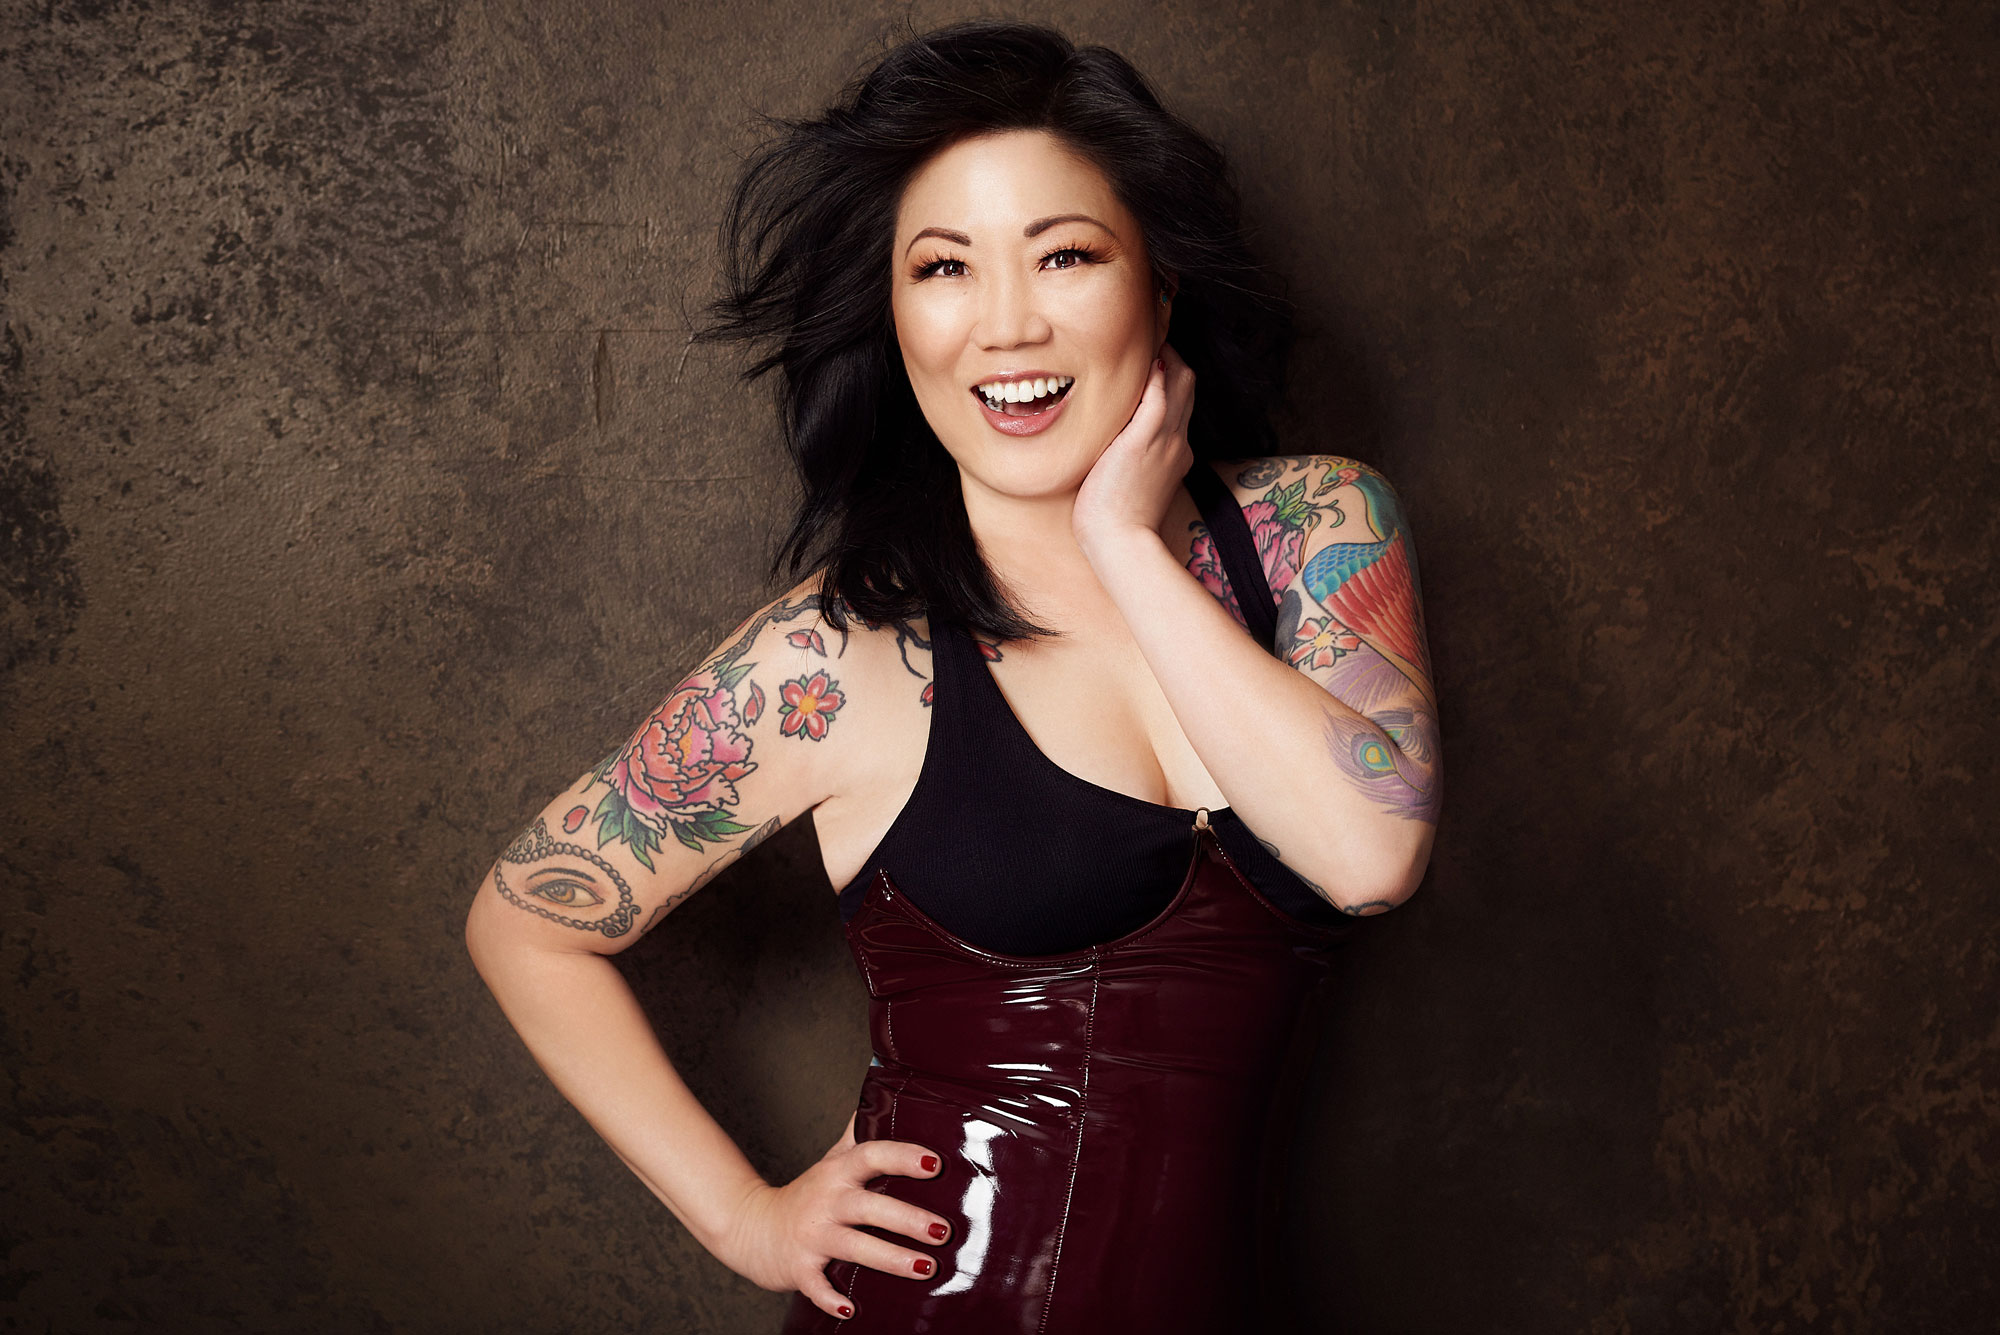 Margaret Cho, a woman wearing a shiny red corset and black tank top, smiles while posing her tattooed arms.